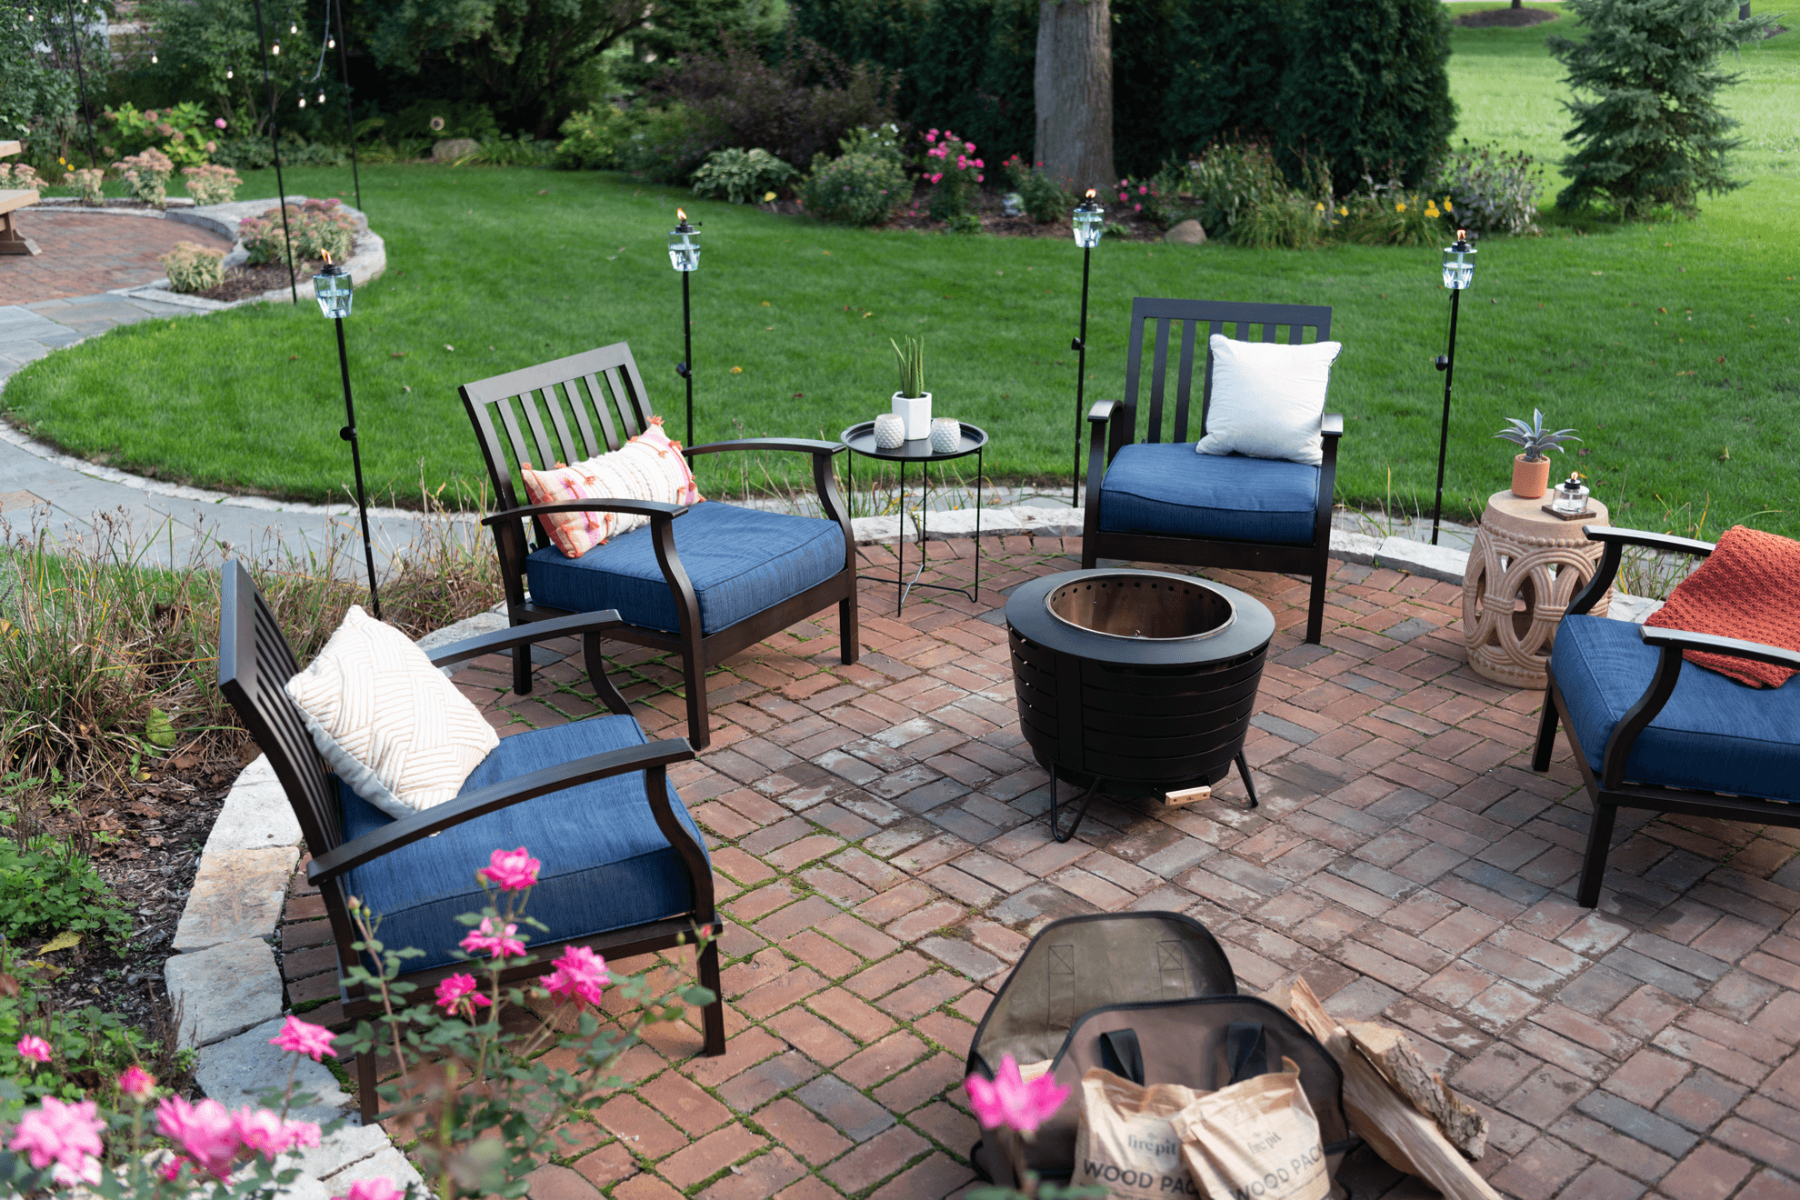 Smokeless Fire Pit as the centerpiece of a peaceful backyard space